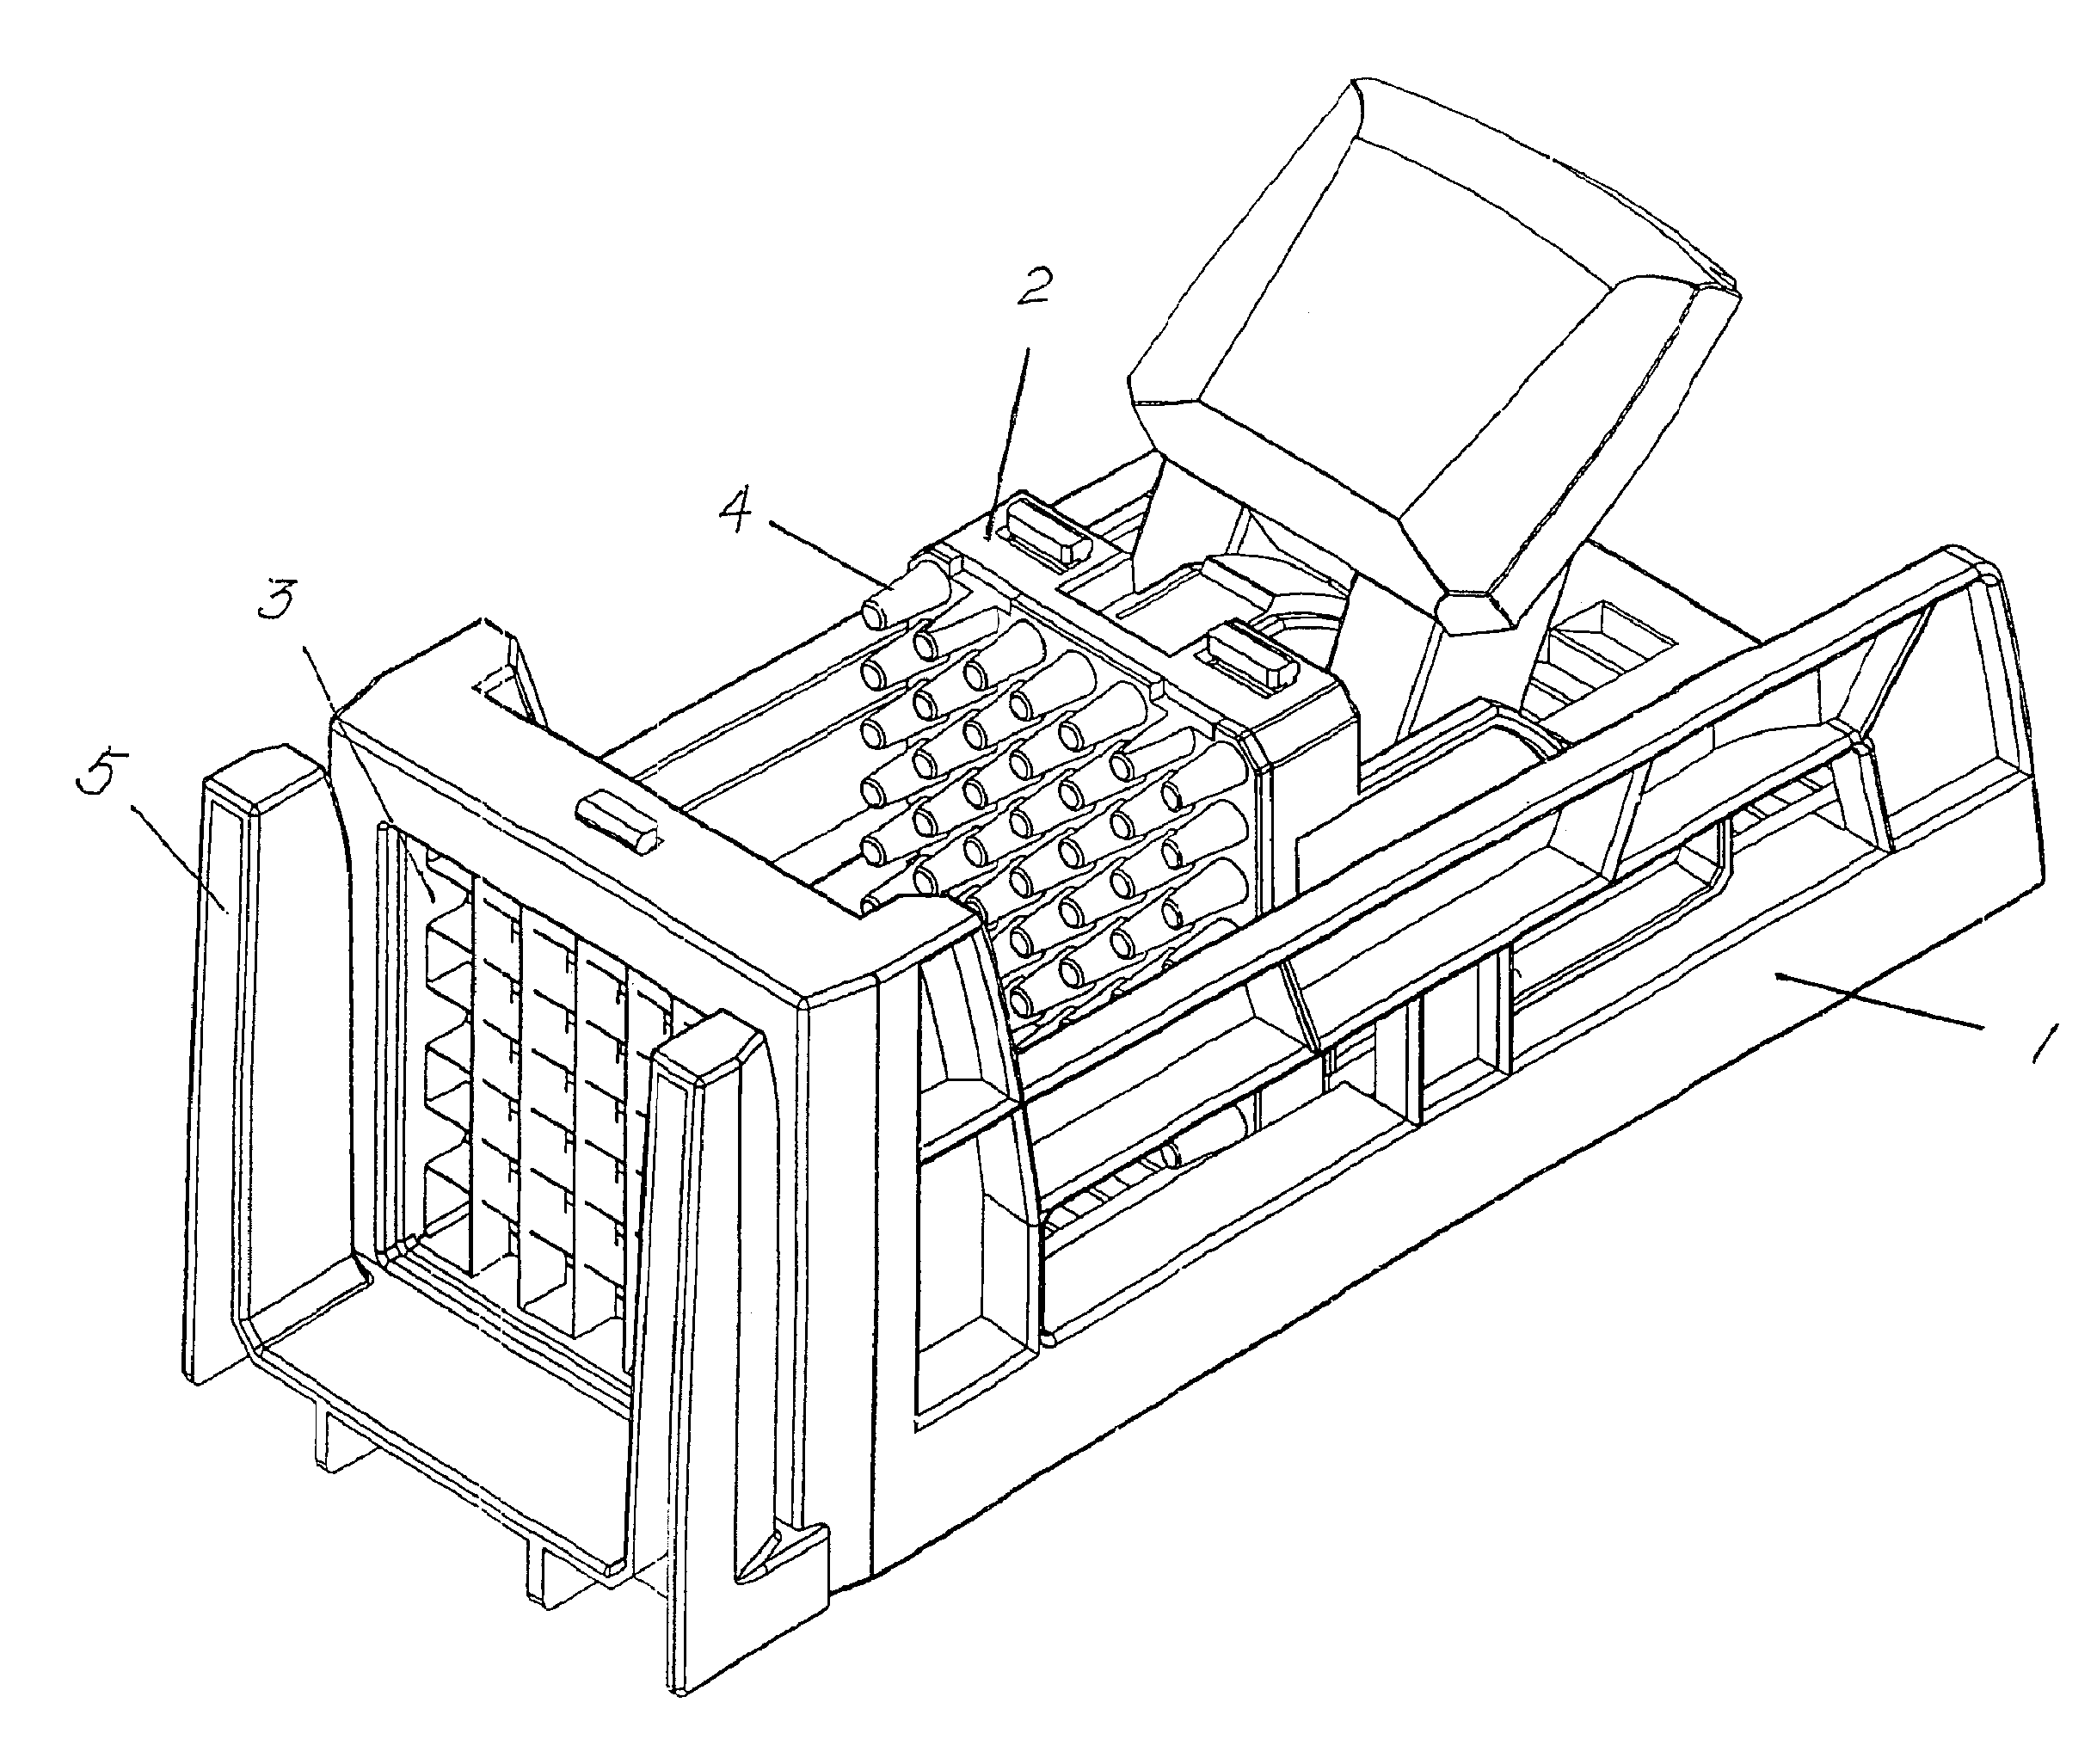 Hand-operated cutting apparatus